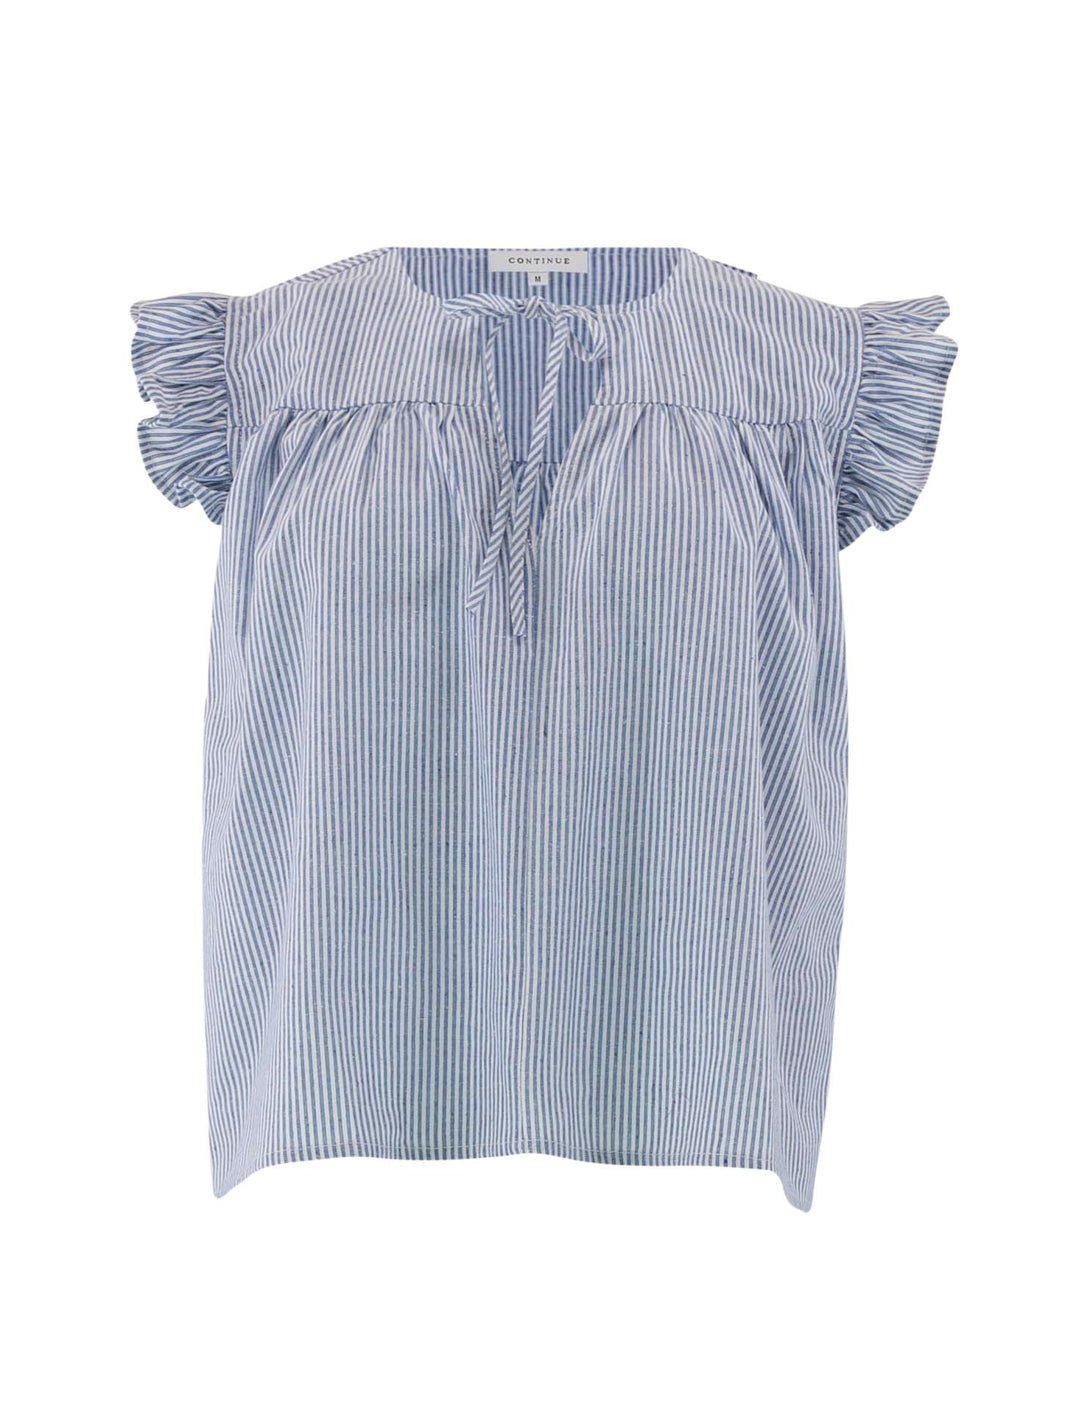 Continue Lilly stripe top blue stripe - Online-Mode